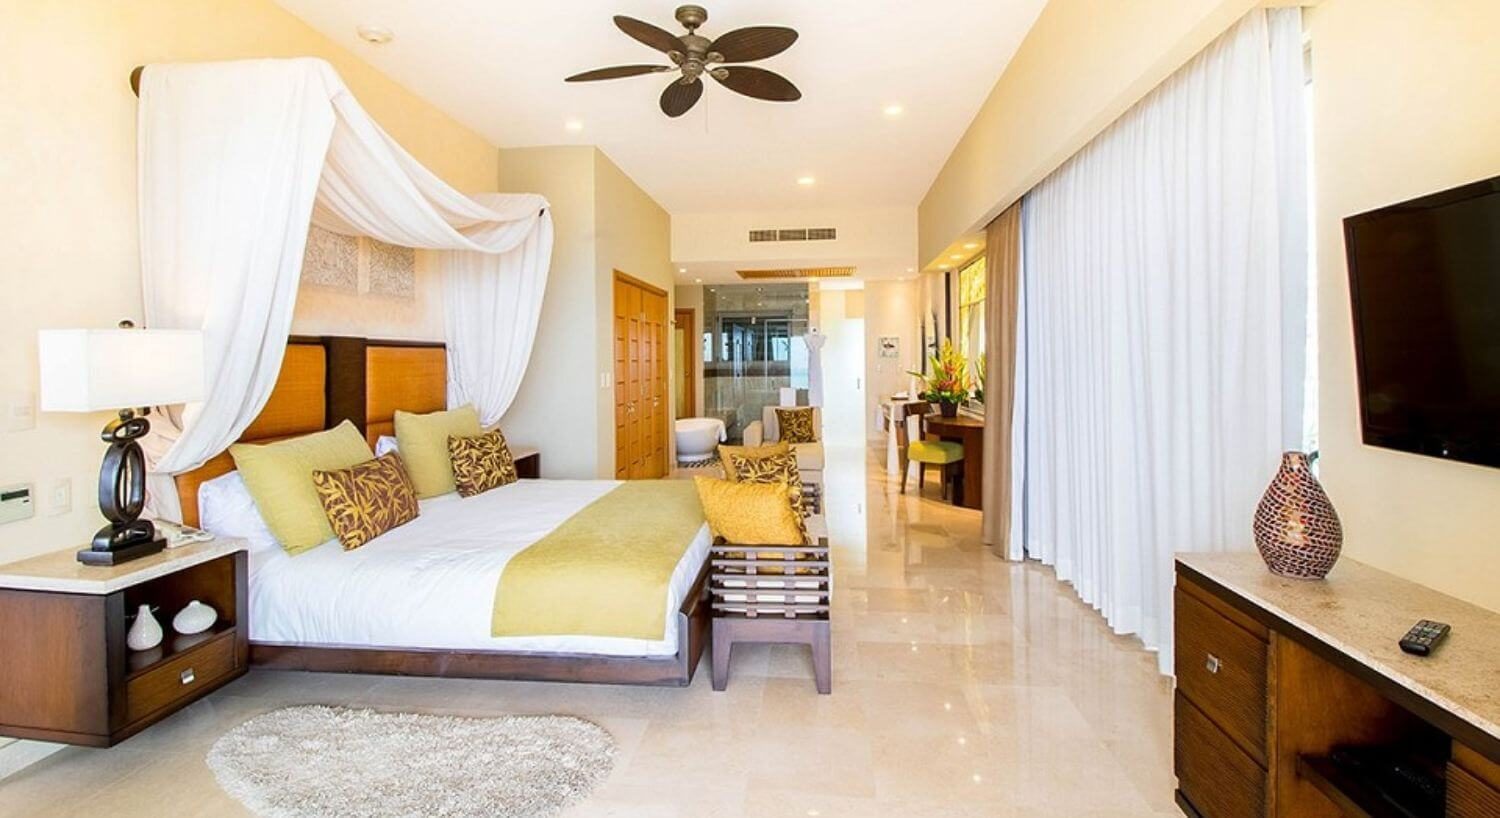 A spacious bedroom with a king bed with white, yellow and brown bedding, a white canopy draped over the head of the bed, nightstands and lamps on either side of the bed, a dresser and TV on the opposite wall, curtains covering sliding doors, and a bathroom with vanity, tub and shower.